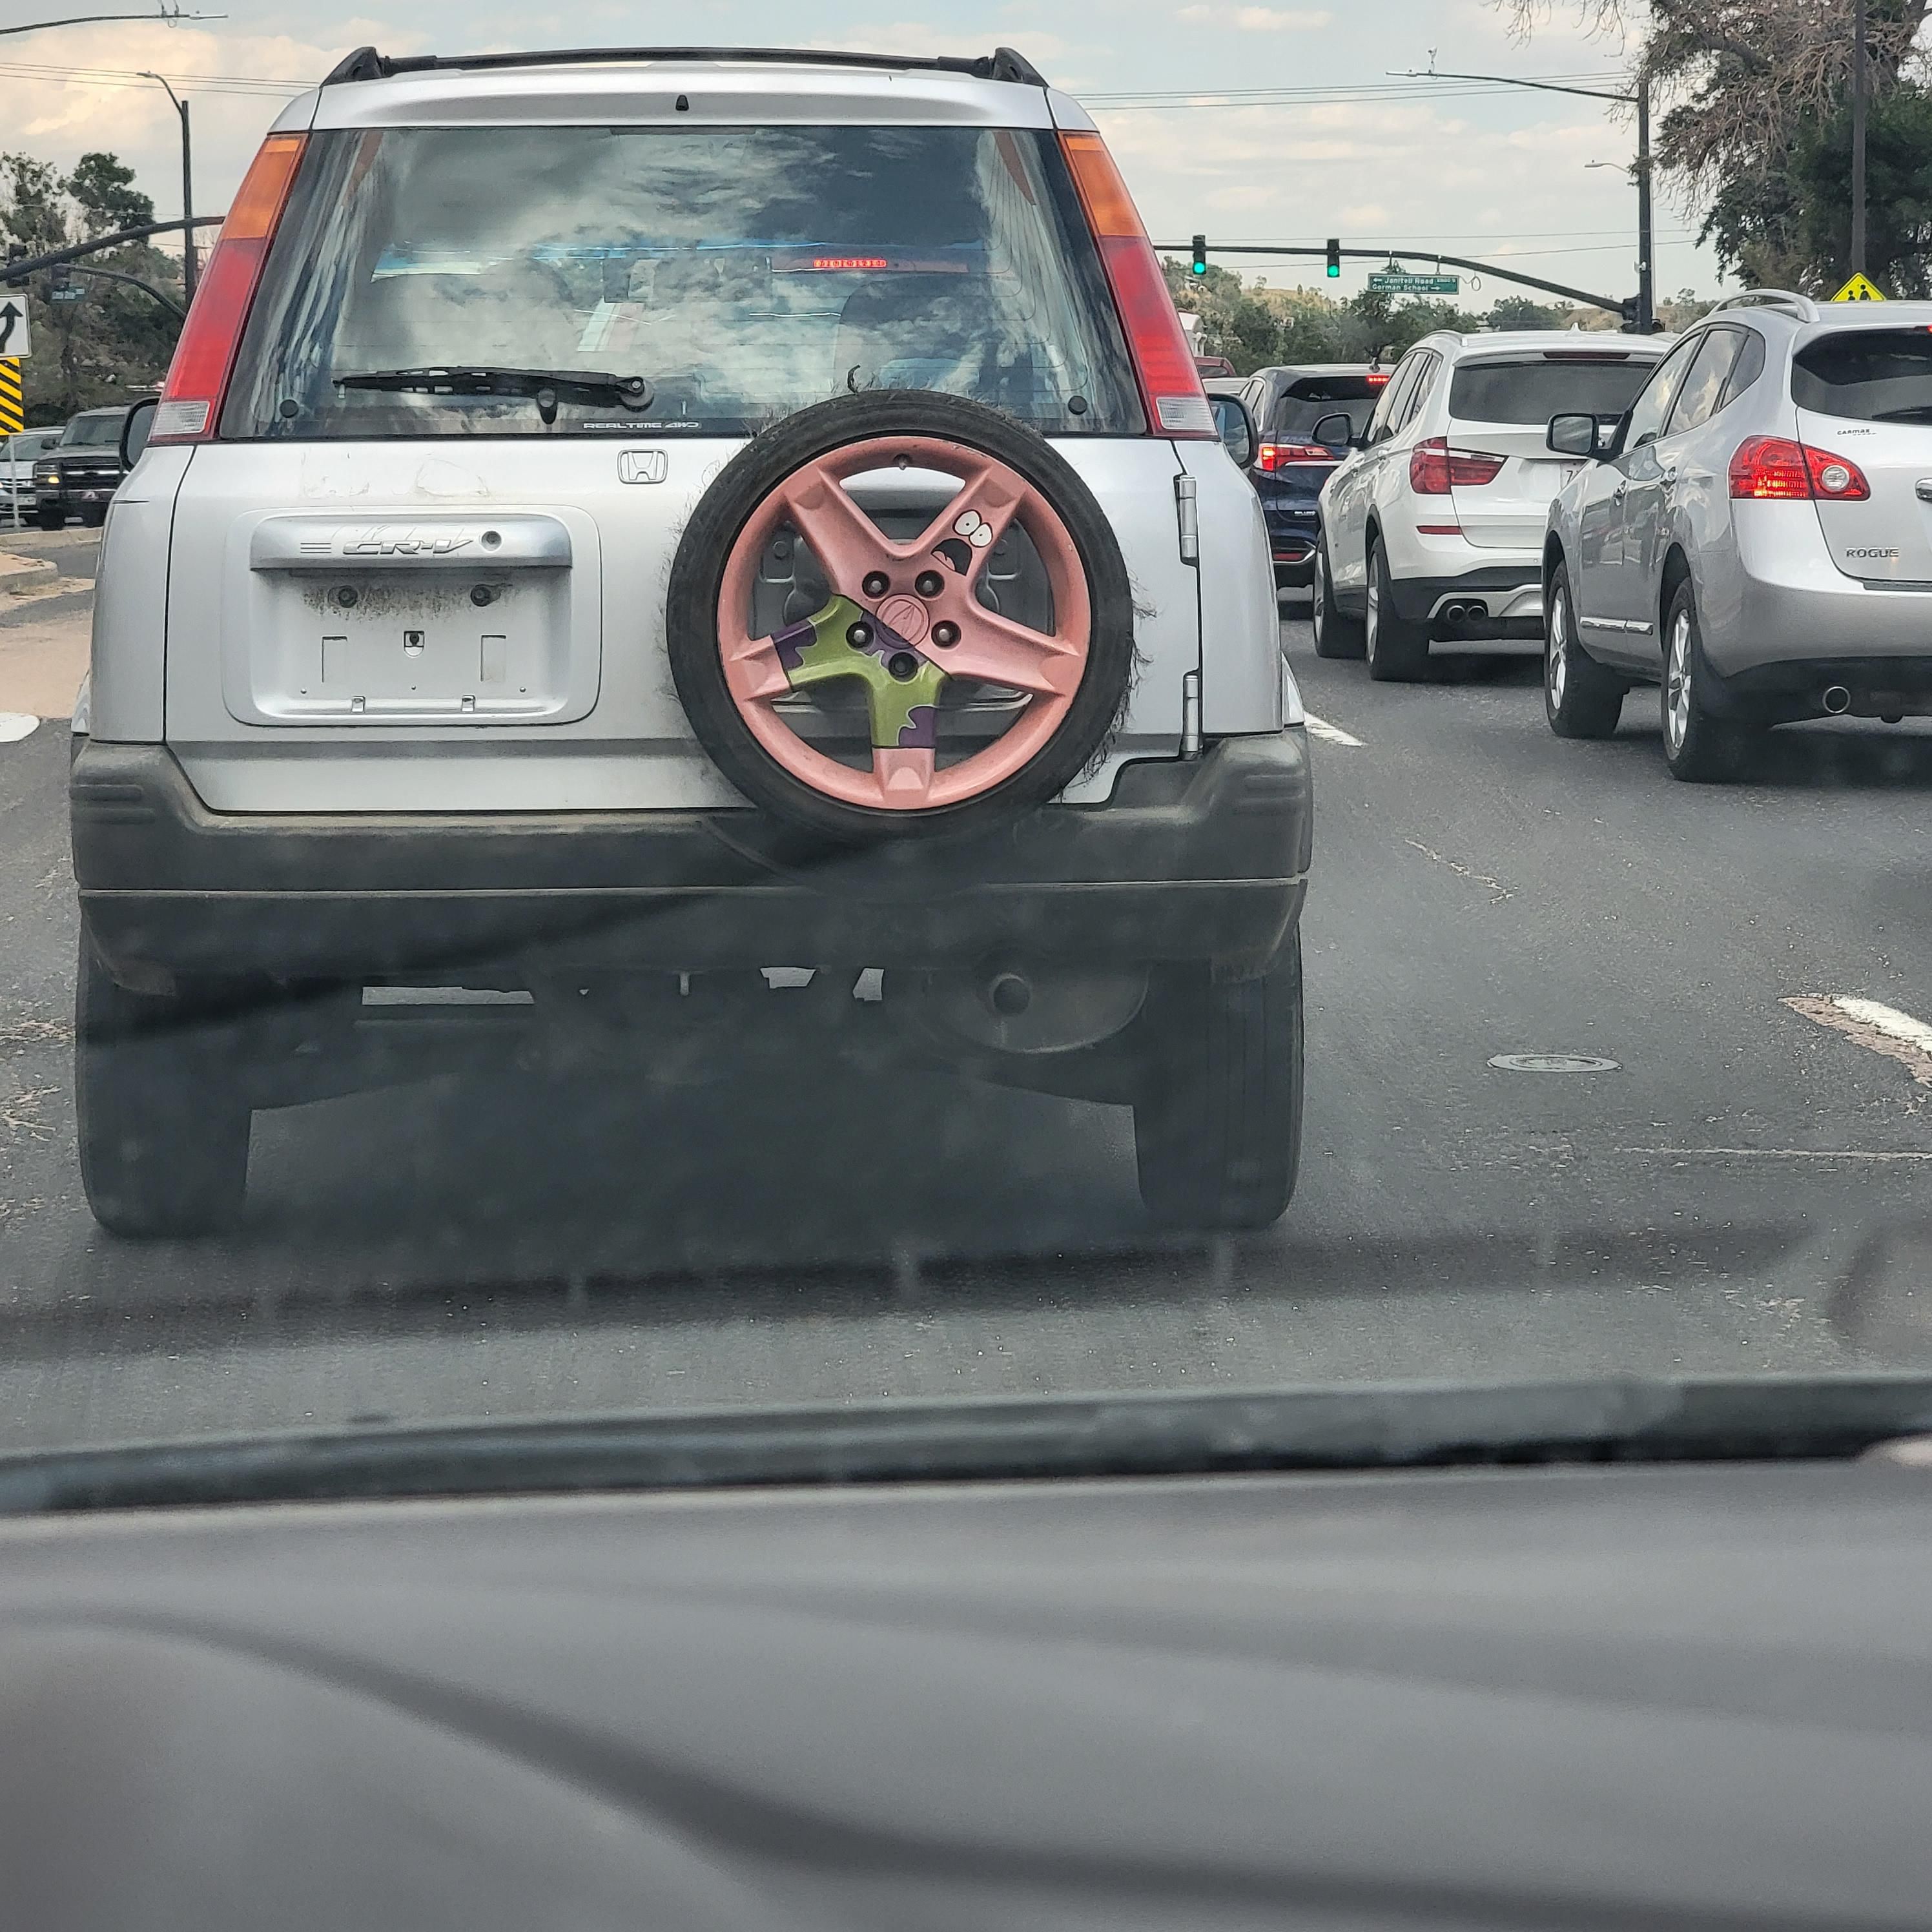 Another funny spare tire on my way to work.